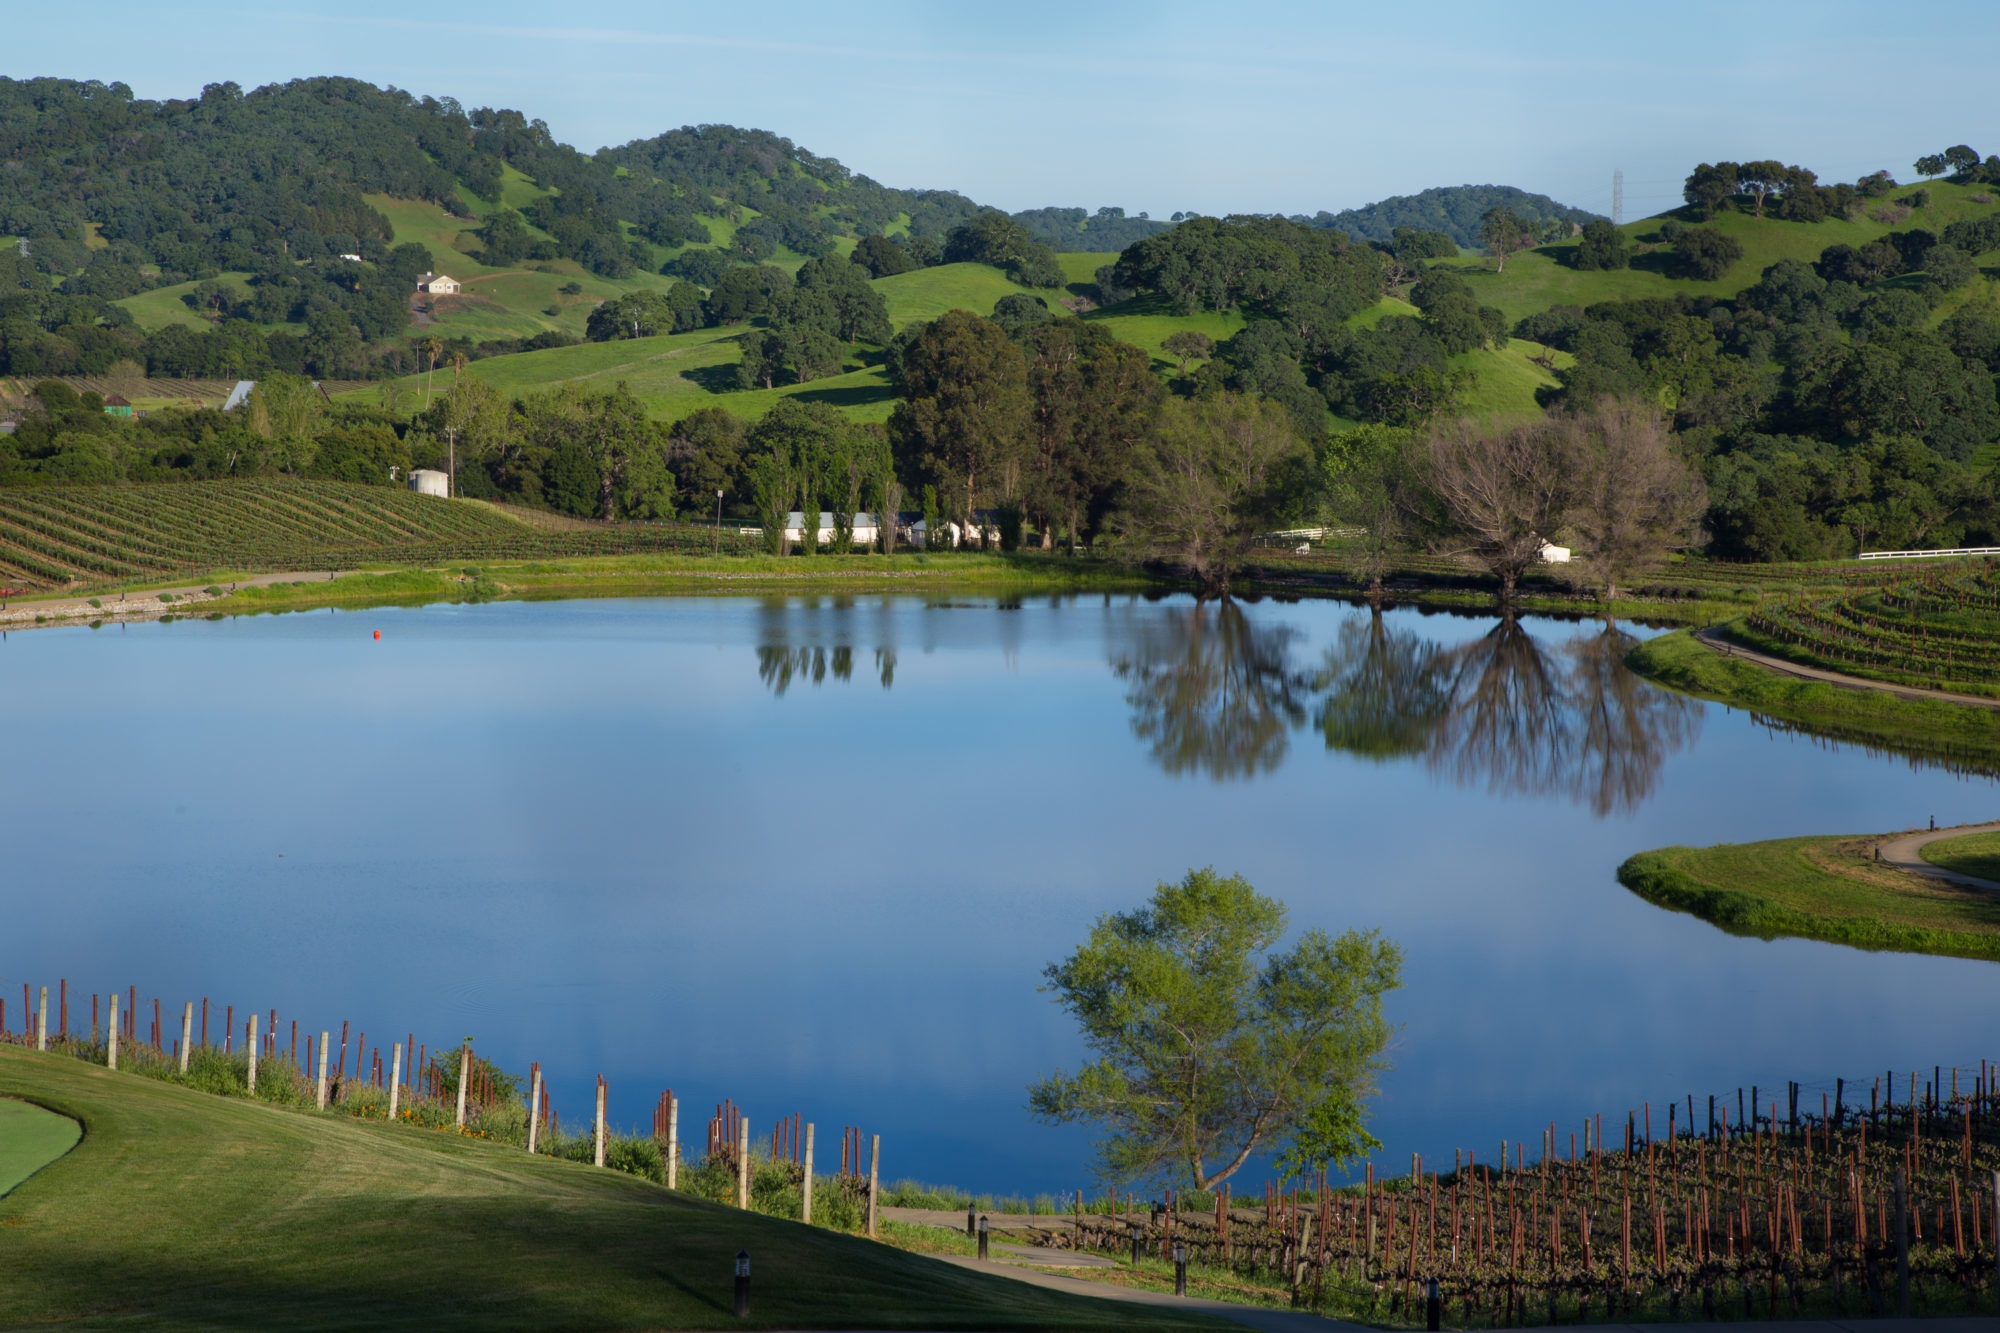 A view of the pond surrounded by lush, green hills.